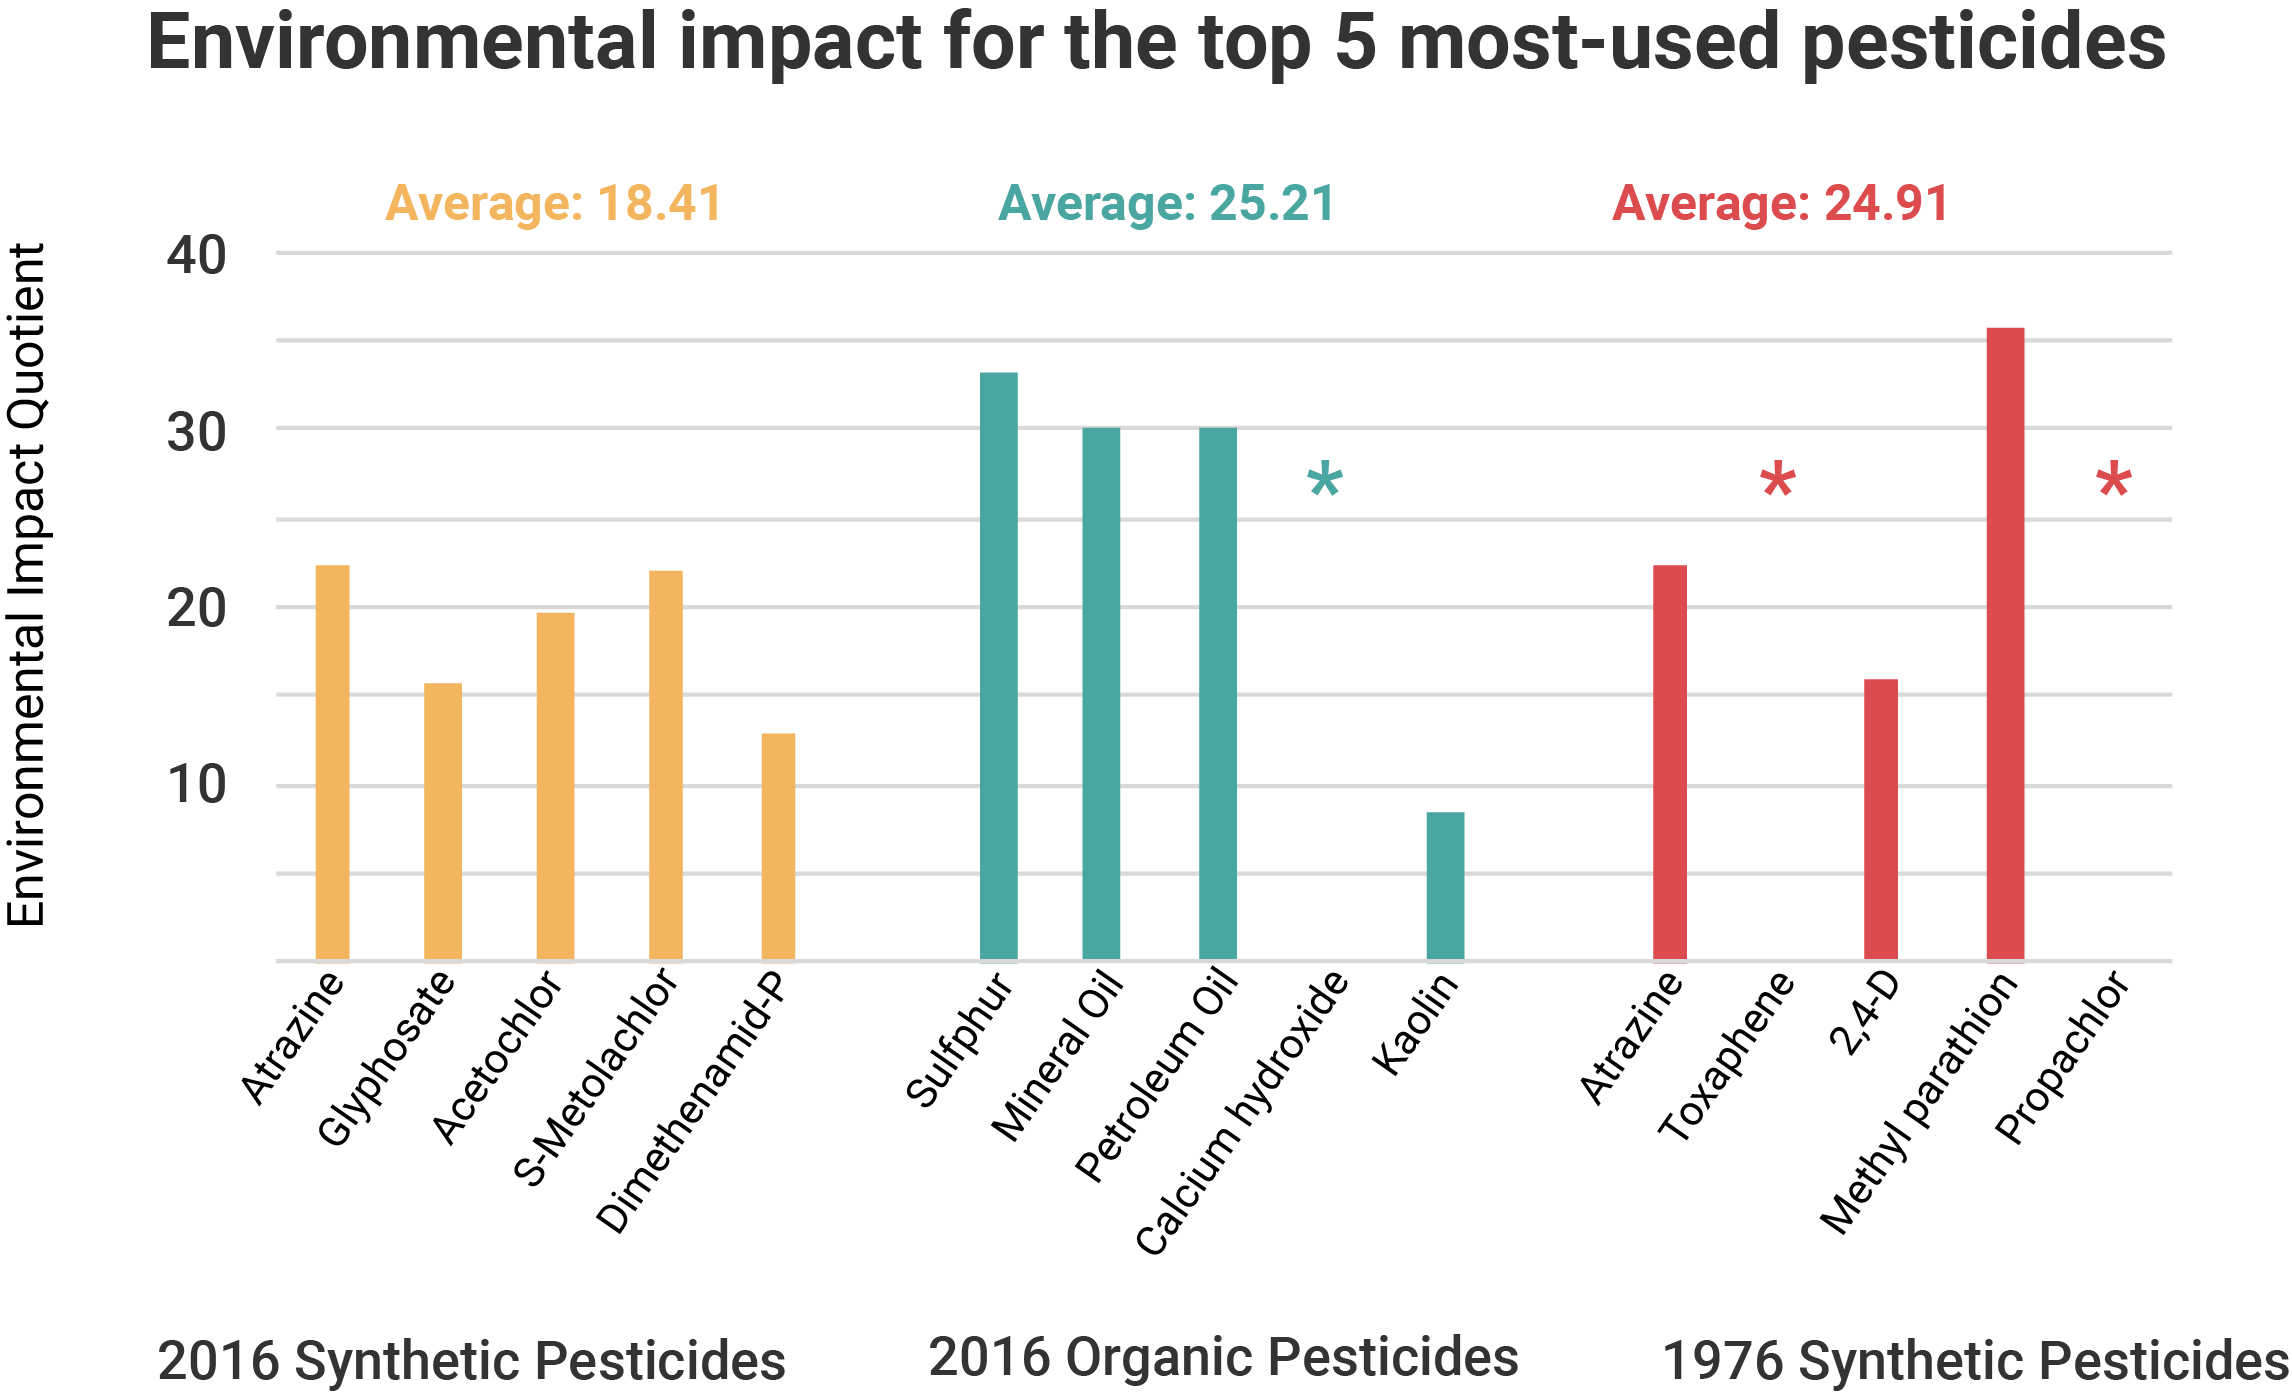 A graph comparing the environmental impact quotient for the top 5 most-used synthetic pesticides from 1976, organic pesticides from 2016, and synthetic pesticides from 2016.